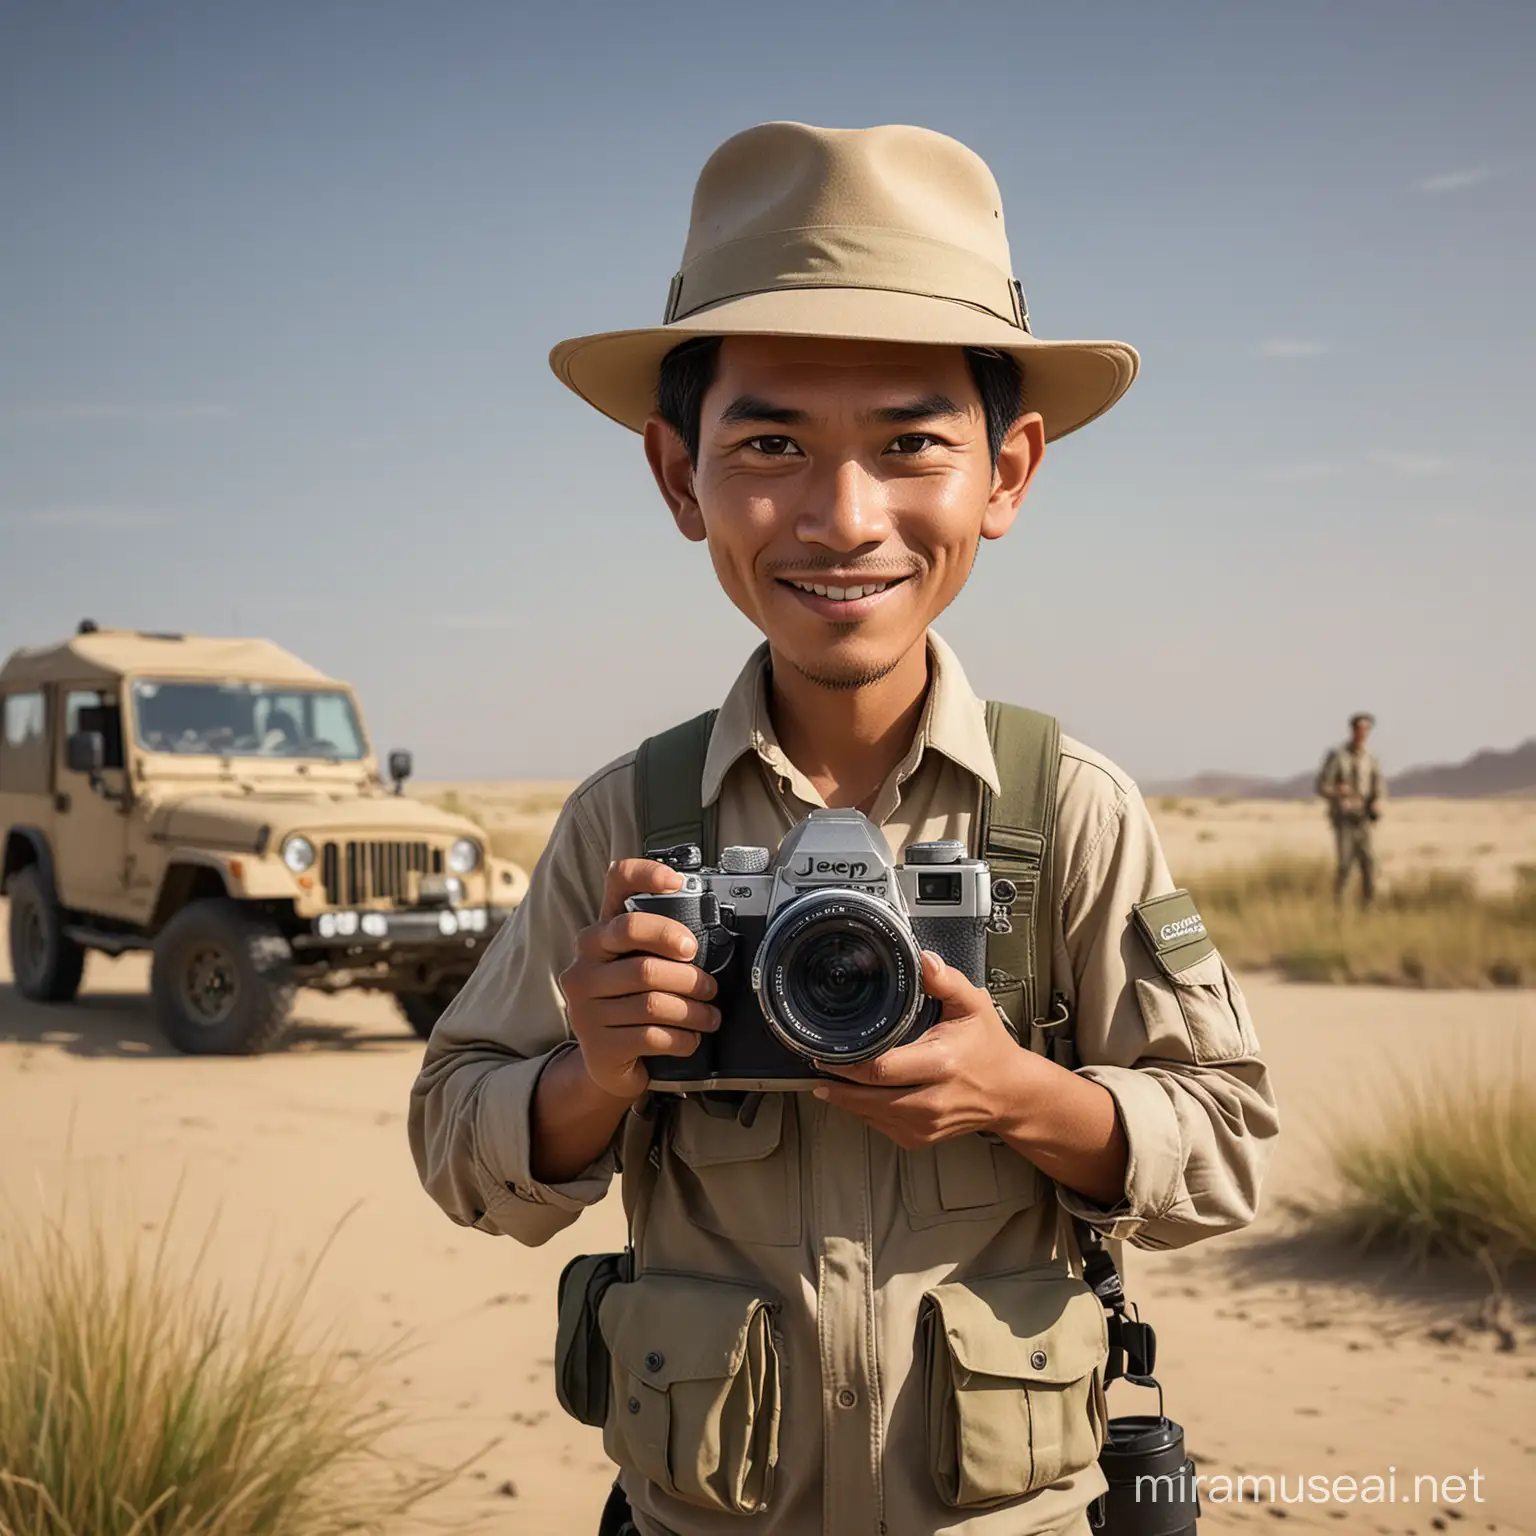 animated caricature image, an Indonesian man with a clean, handsome face holding a camera with a telephoto lens, dressed in field clothes, with a jeep in the background in a grassland and sand, photographed at a distance of 5 meters by a professional photographer